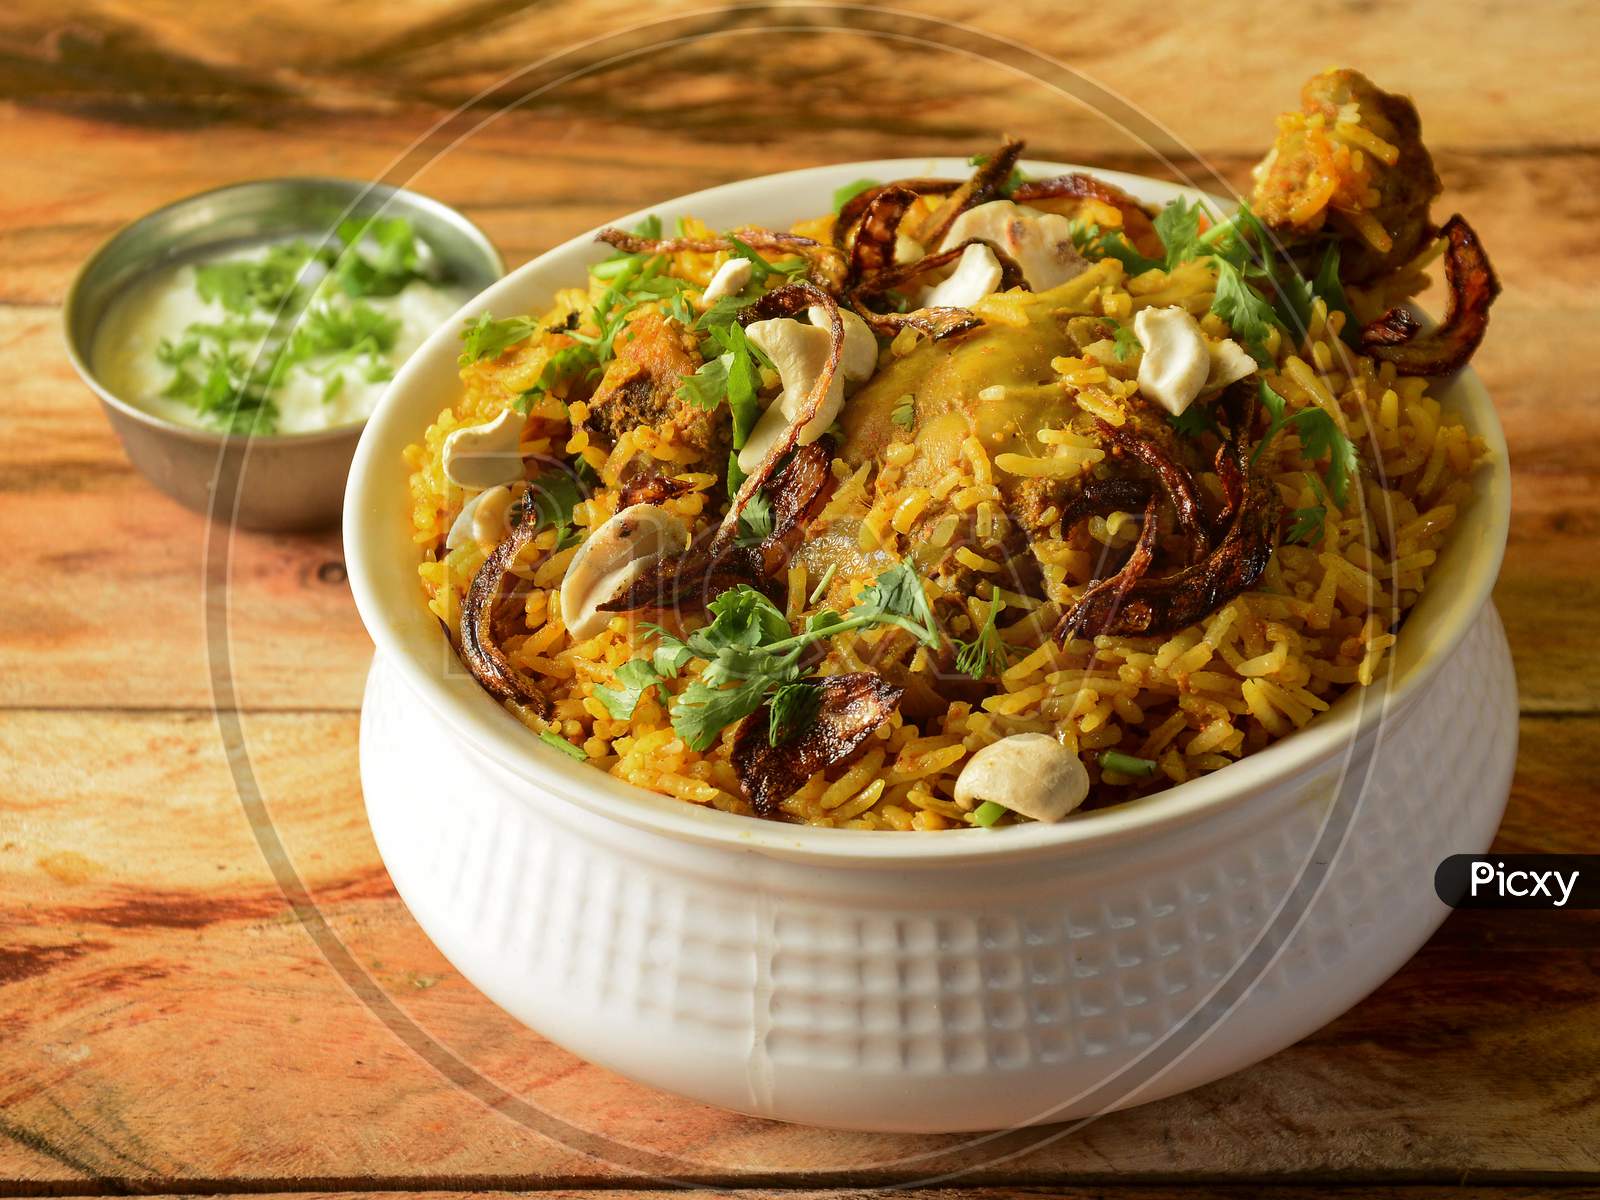 Traditional Hyderabadi Chicken Dum Biryani Made Of Basmati Rice Cooked With Masala Spices, Served With Onion Raita, Selective Focus